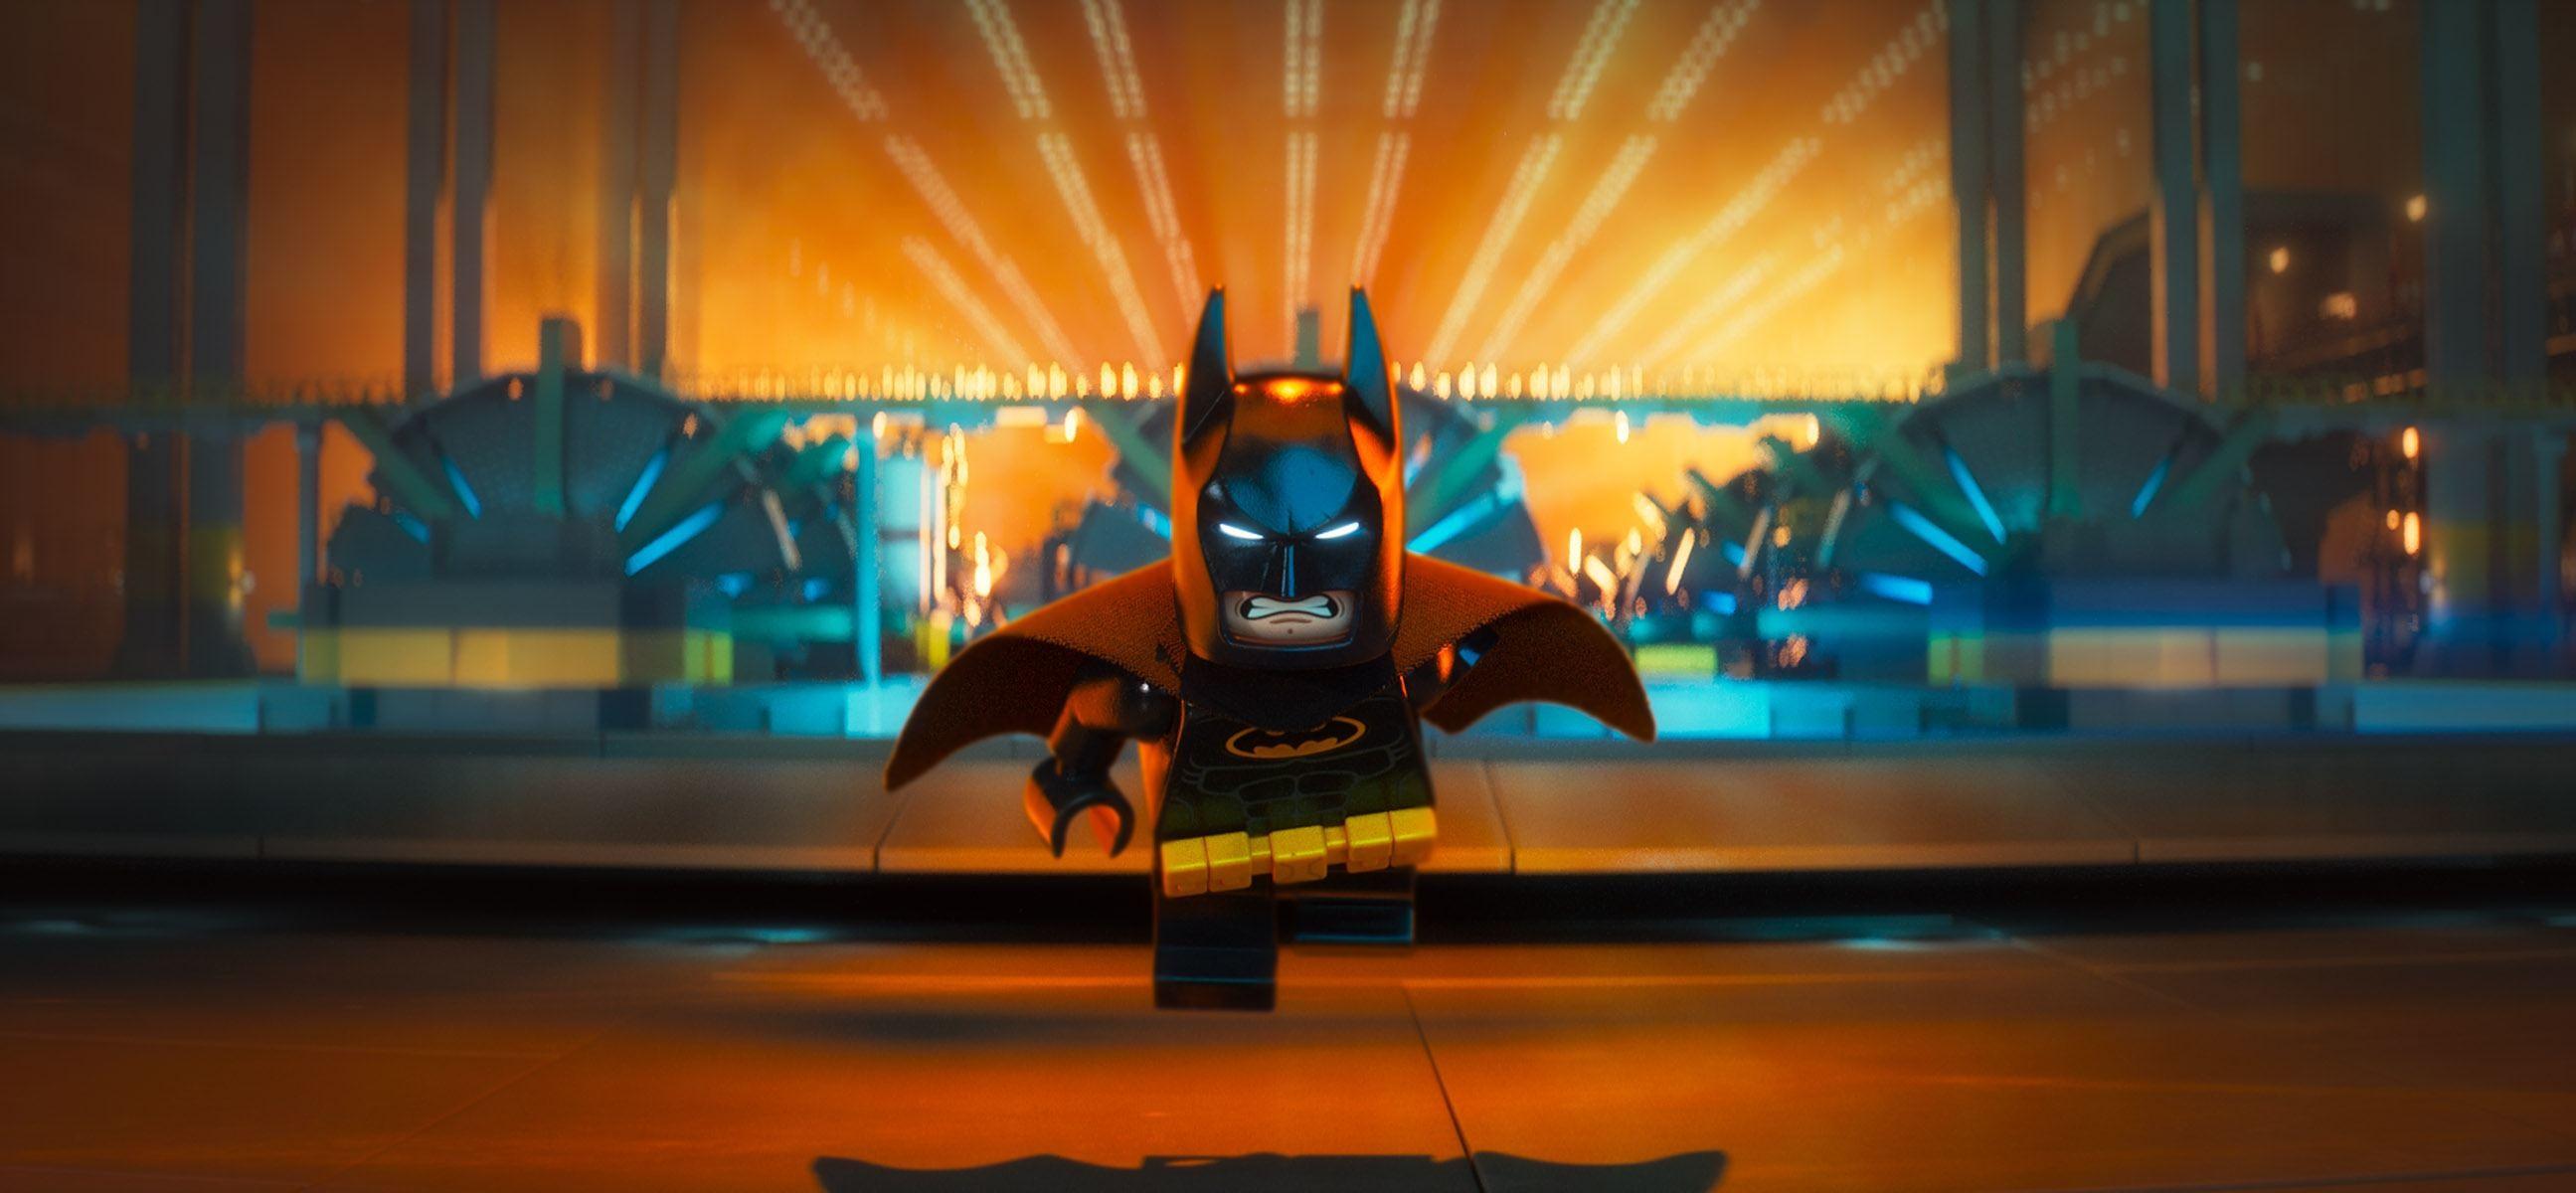 2591 x 1200 · jpeg - The Lego Batman Movie Wallpapers (80+ images)